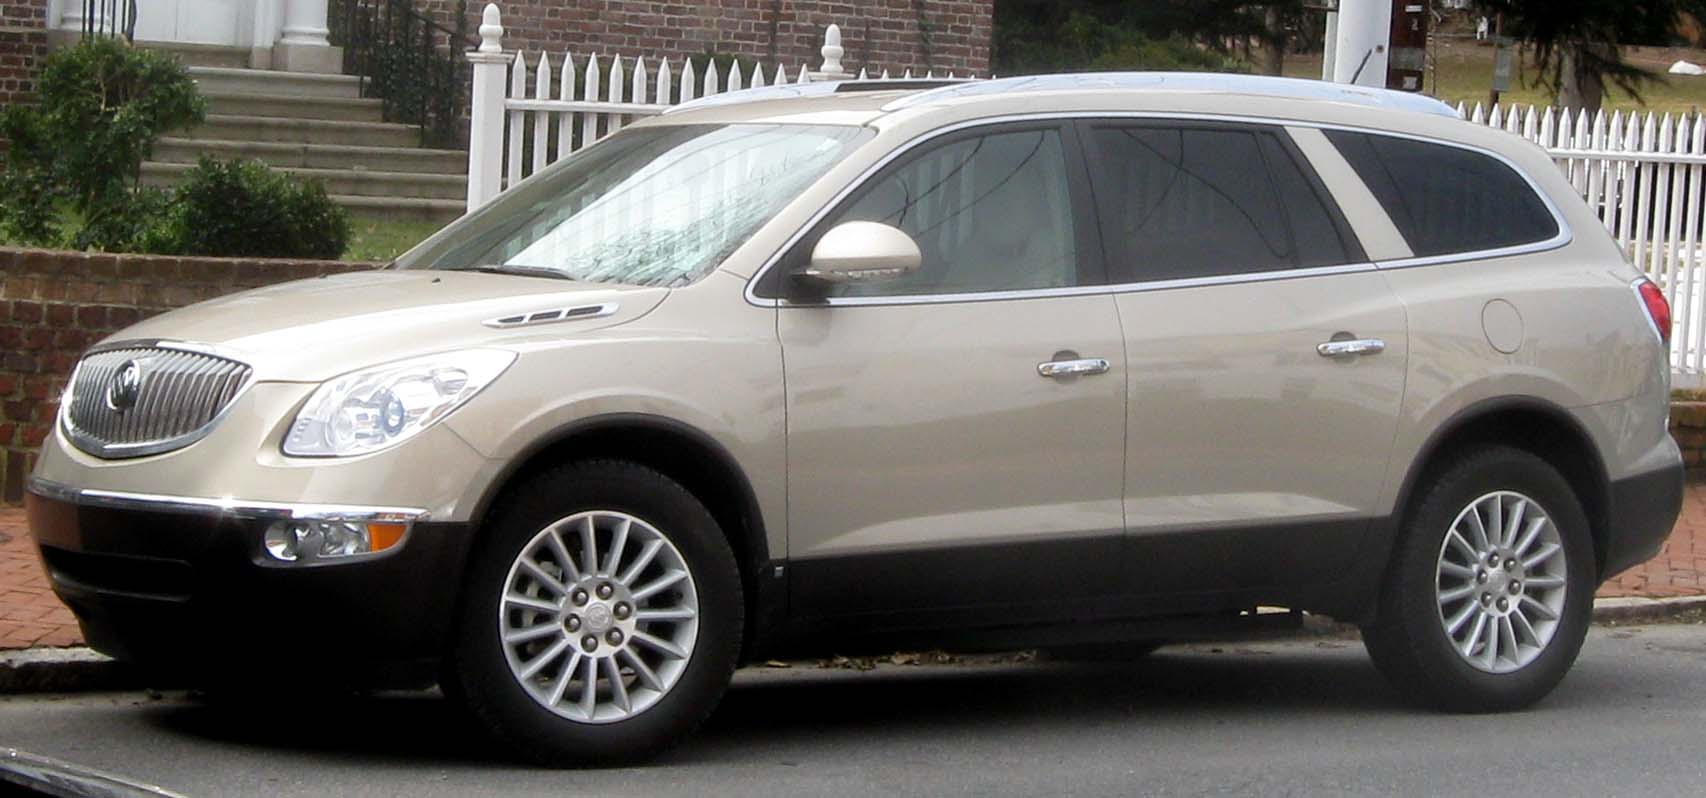 File:Buick Enclave CXL -- 03-05-2010.jpg - Wikimedia Commons